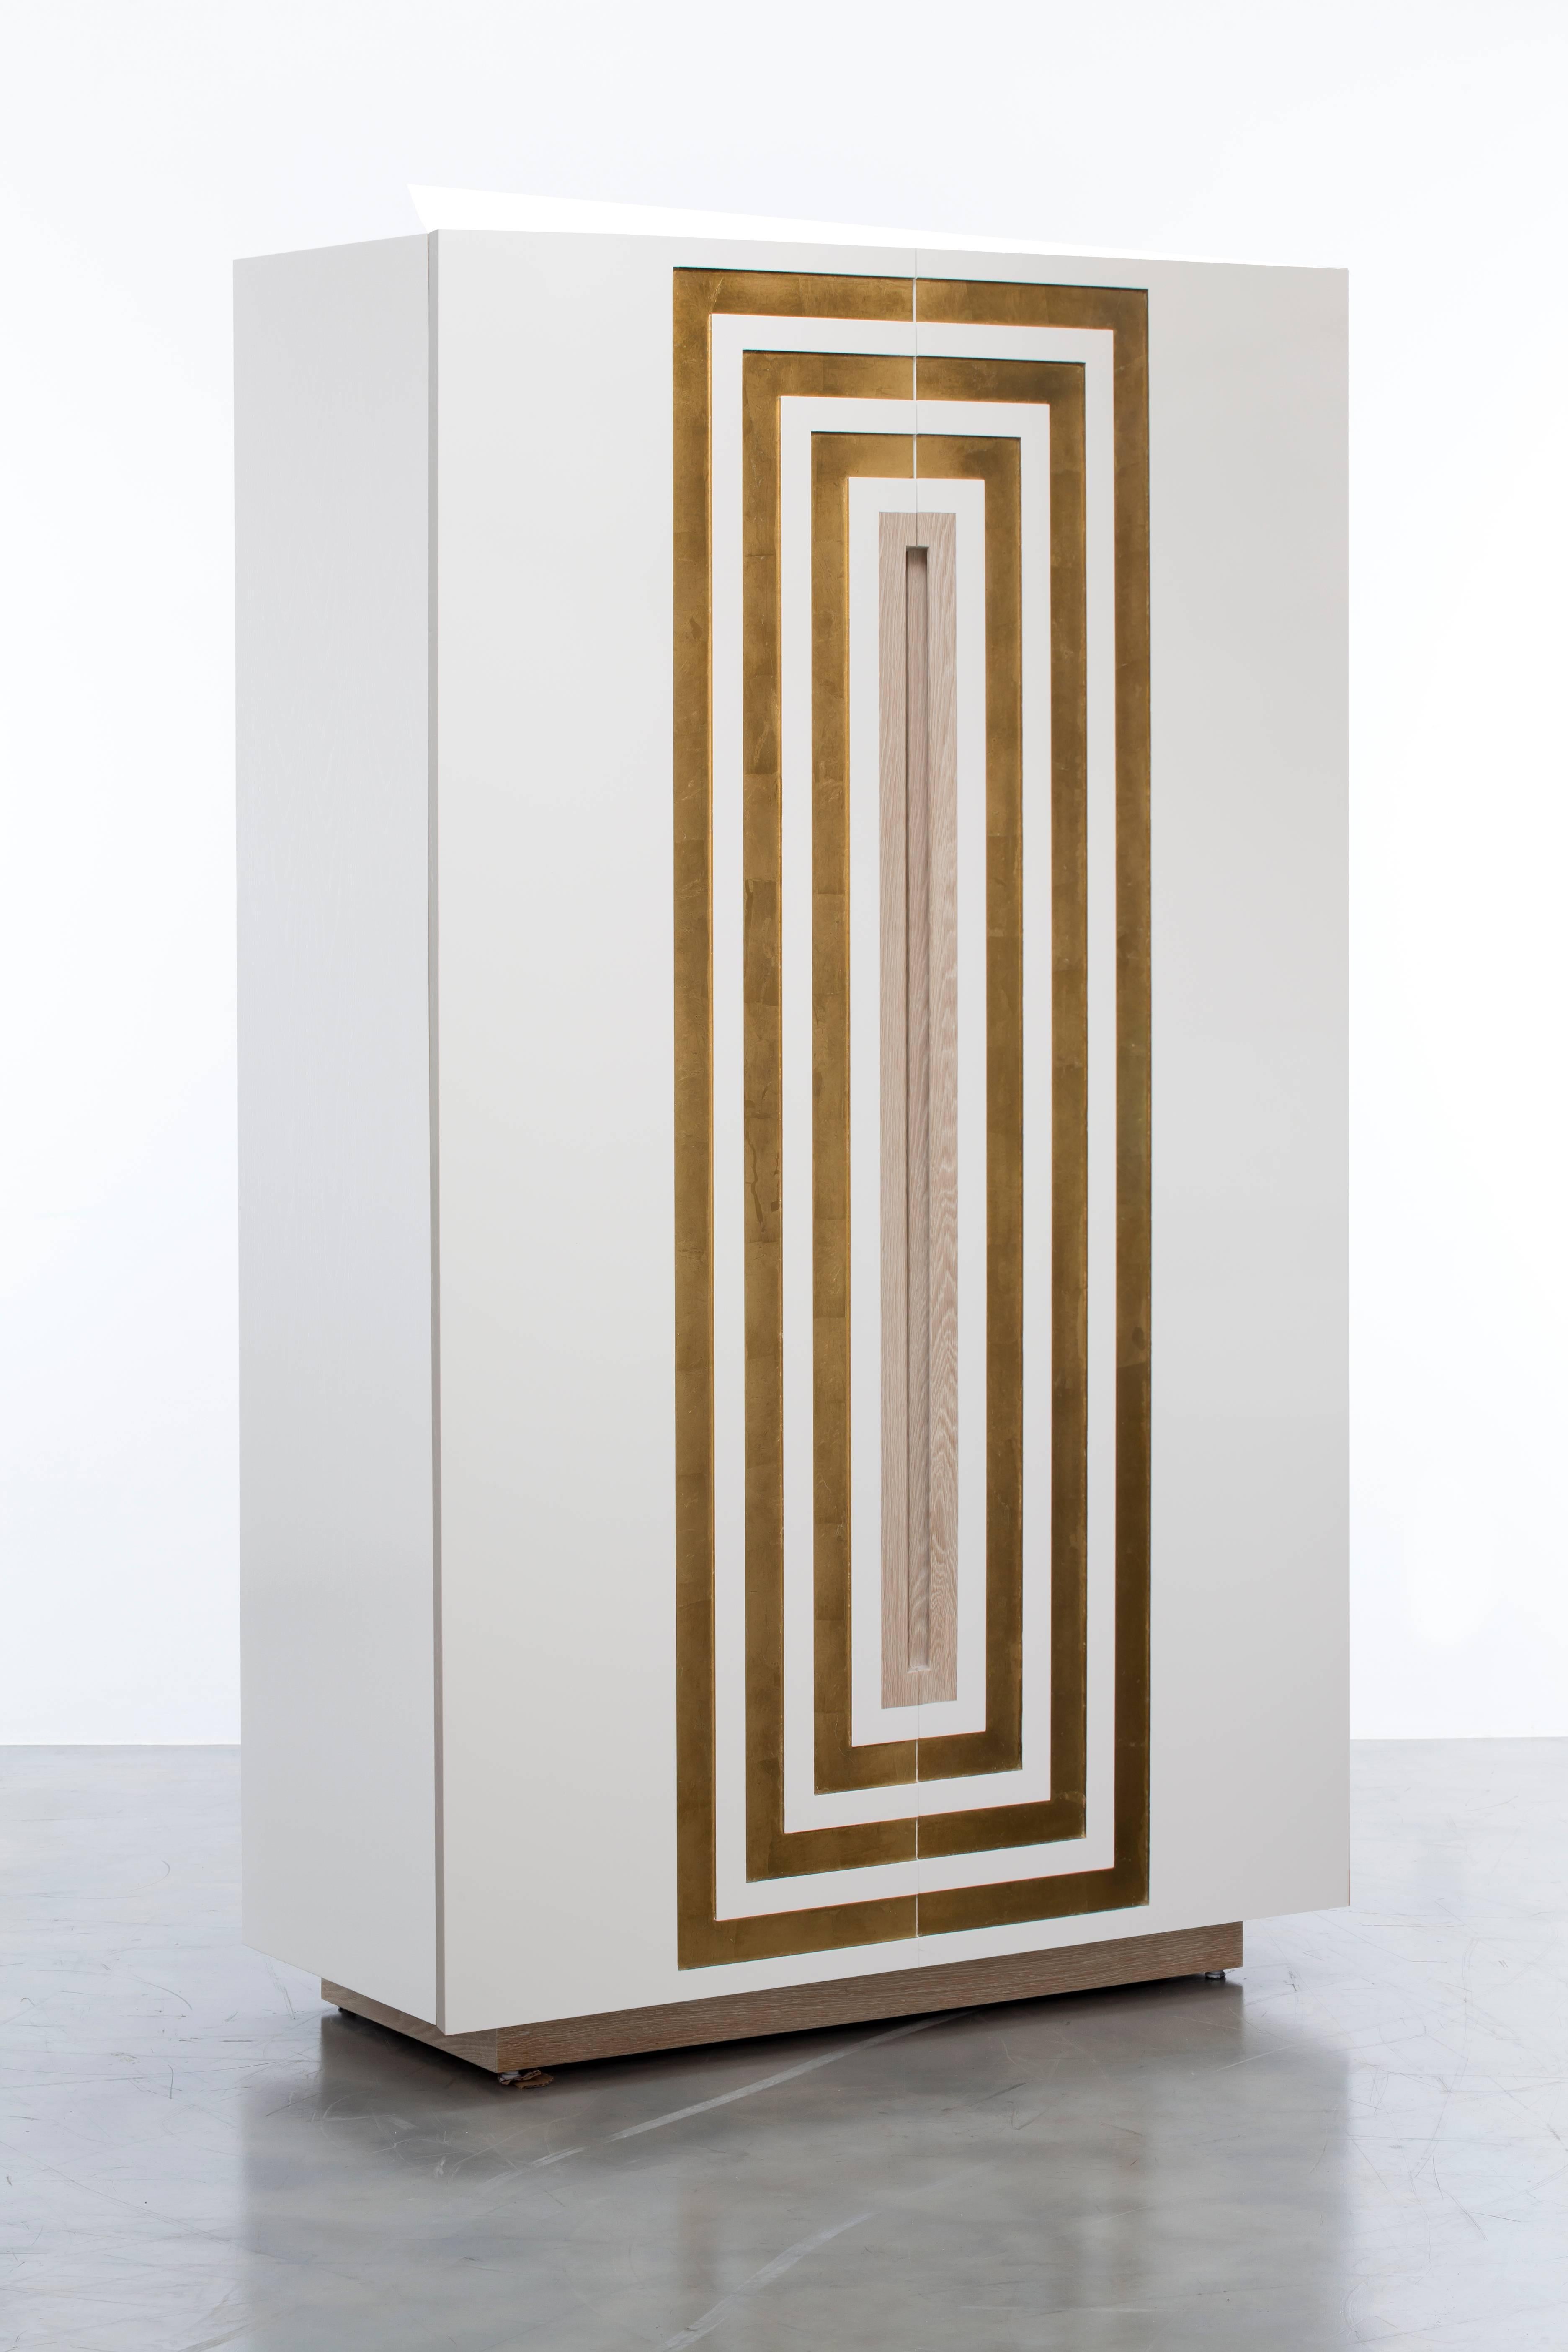 The Celeste bar cabinet features a white lacquer over oak body with a gold leaf inlay detail. The interior standard comes as a dry bar including puck lighting, Carrara marble, four drawers and liquor bottle storage.  This is a showroom sample sold